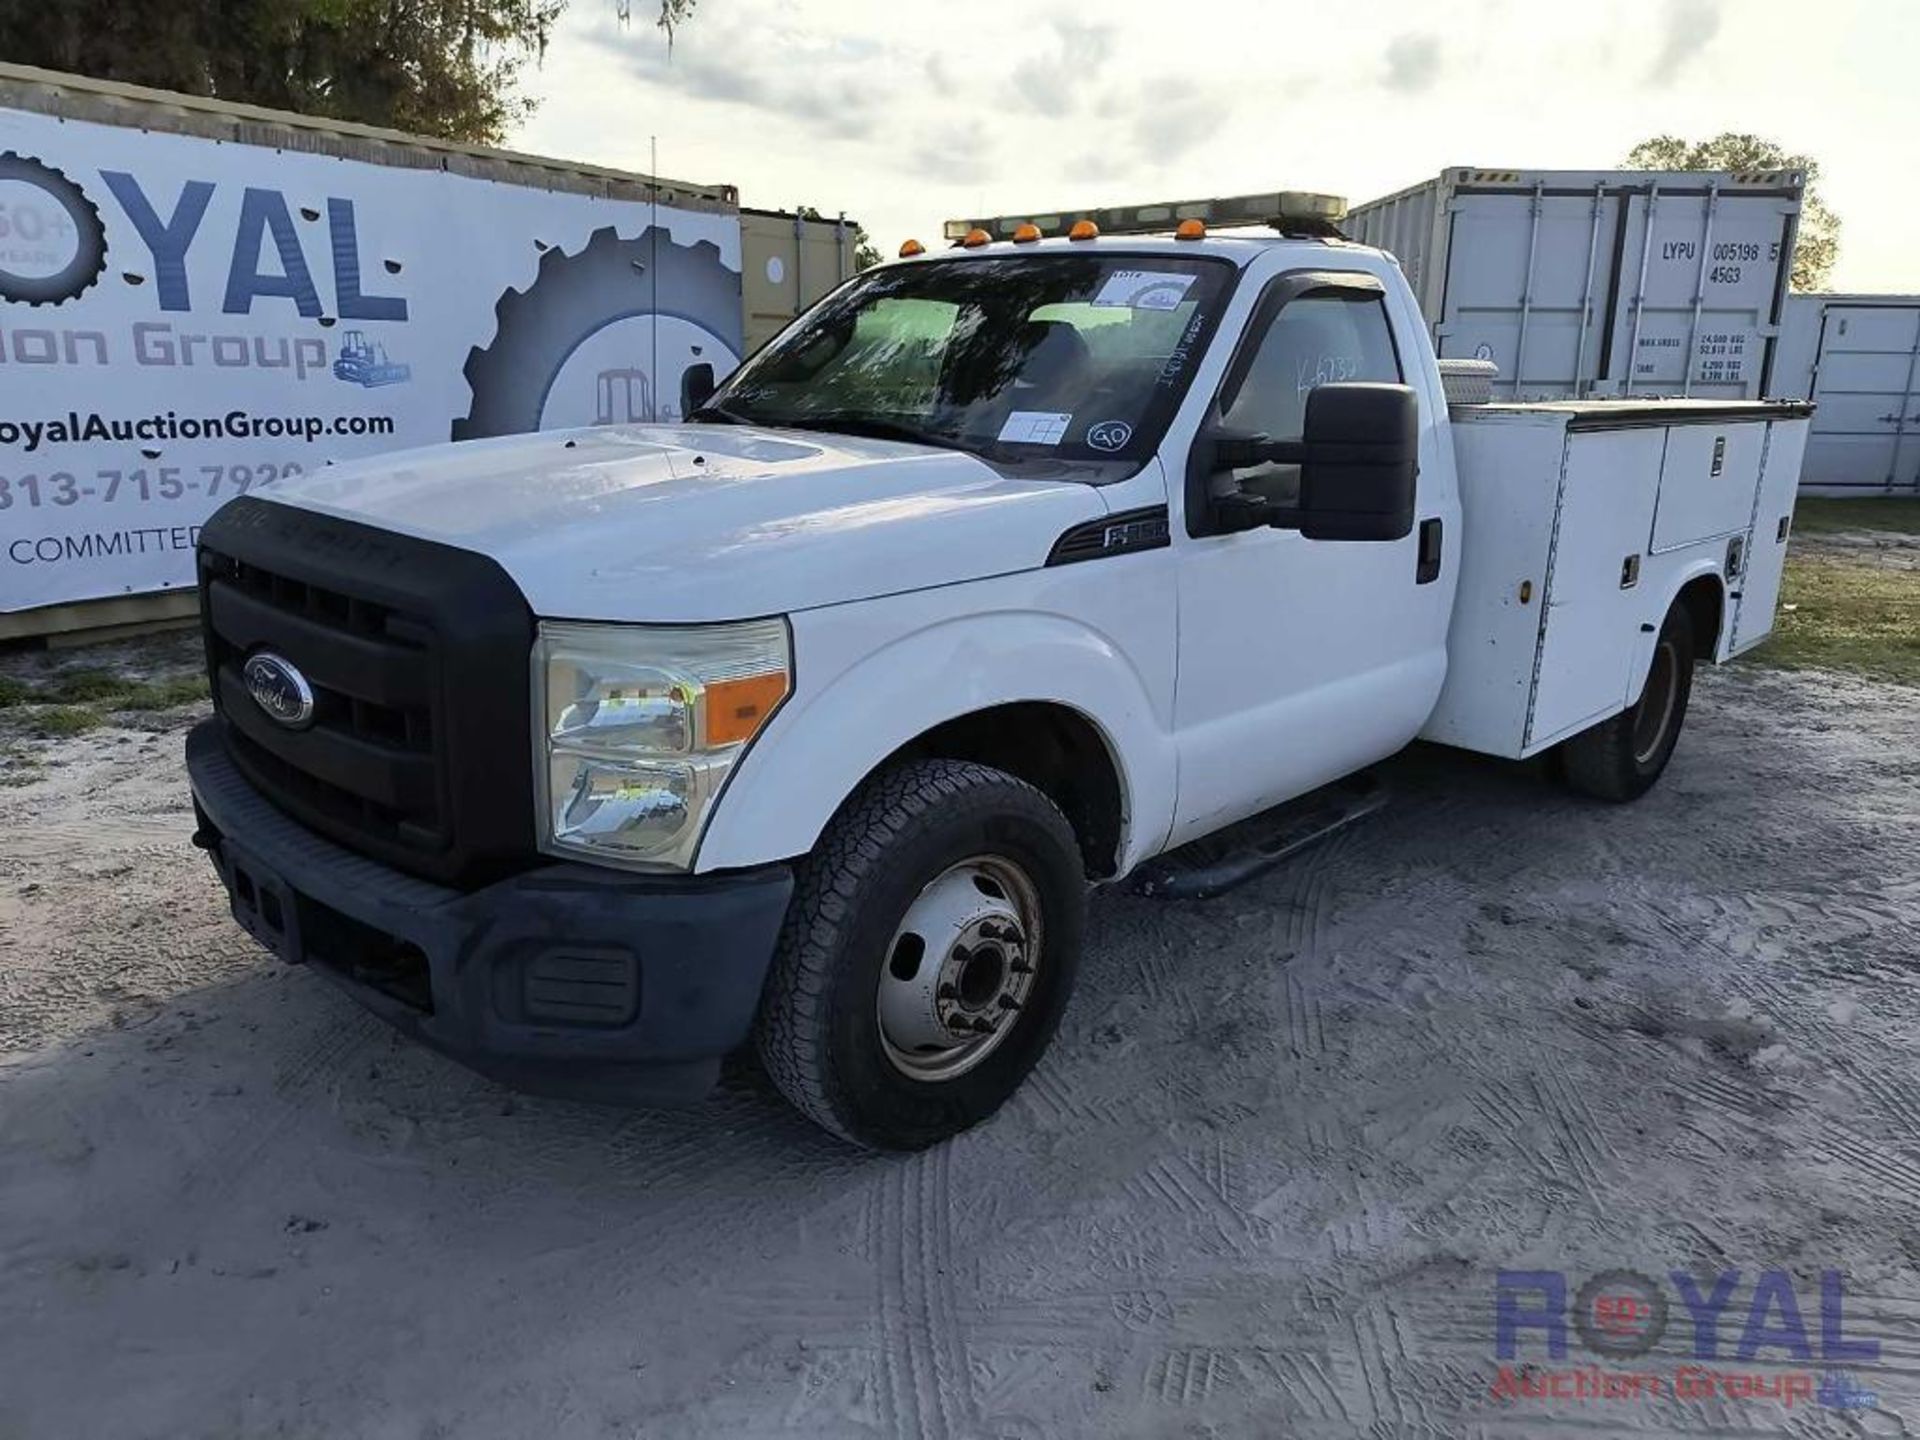 2011 Ford F-350 Service Truck